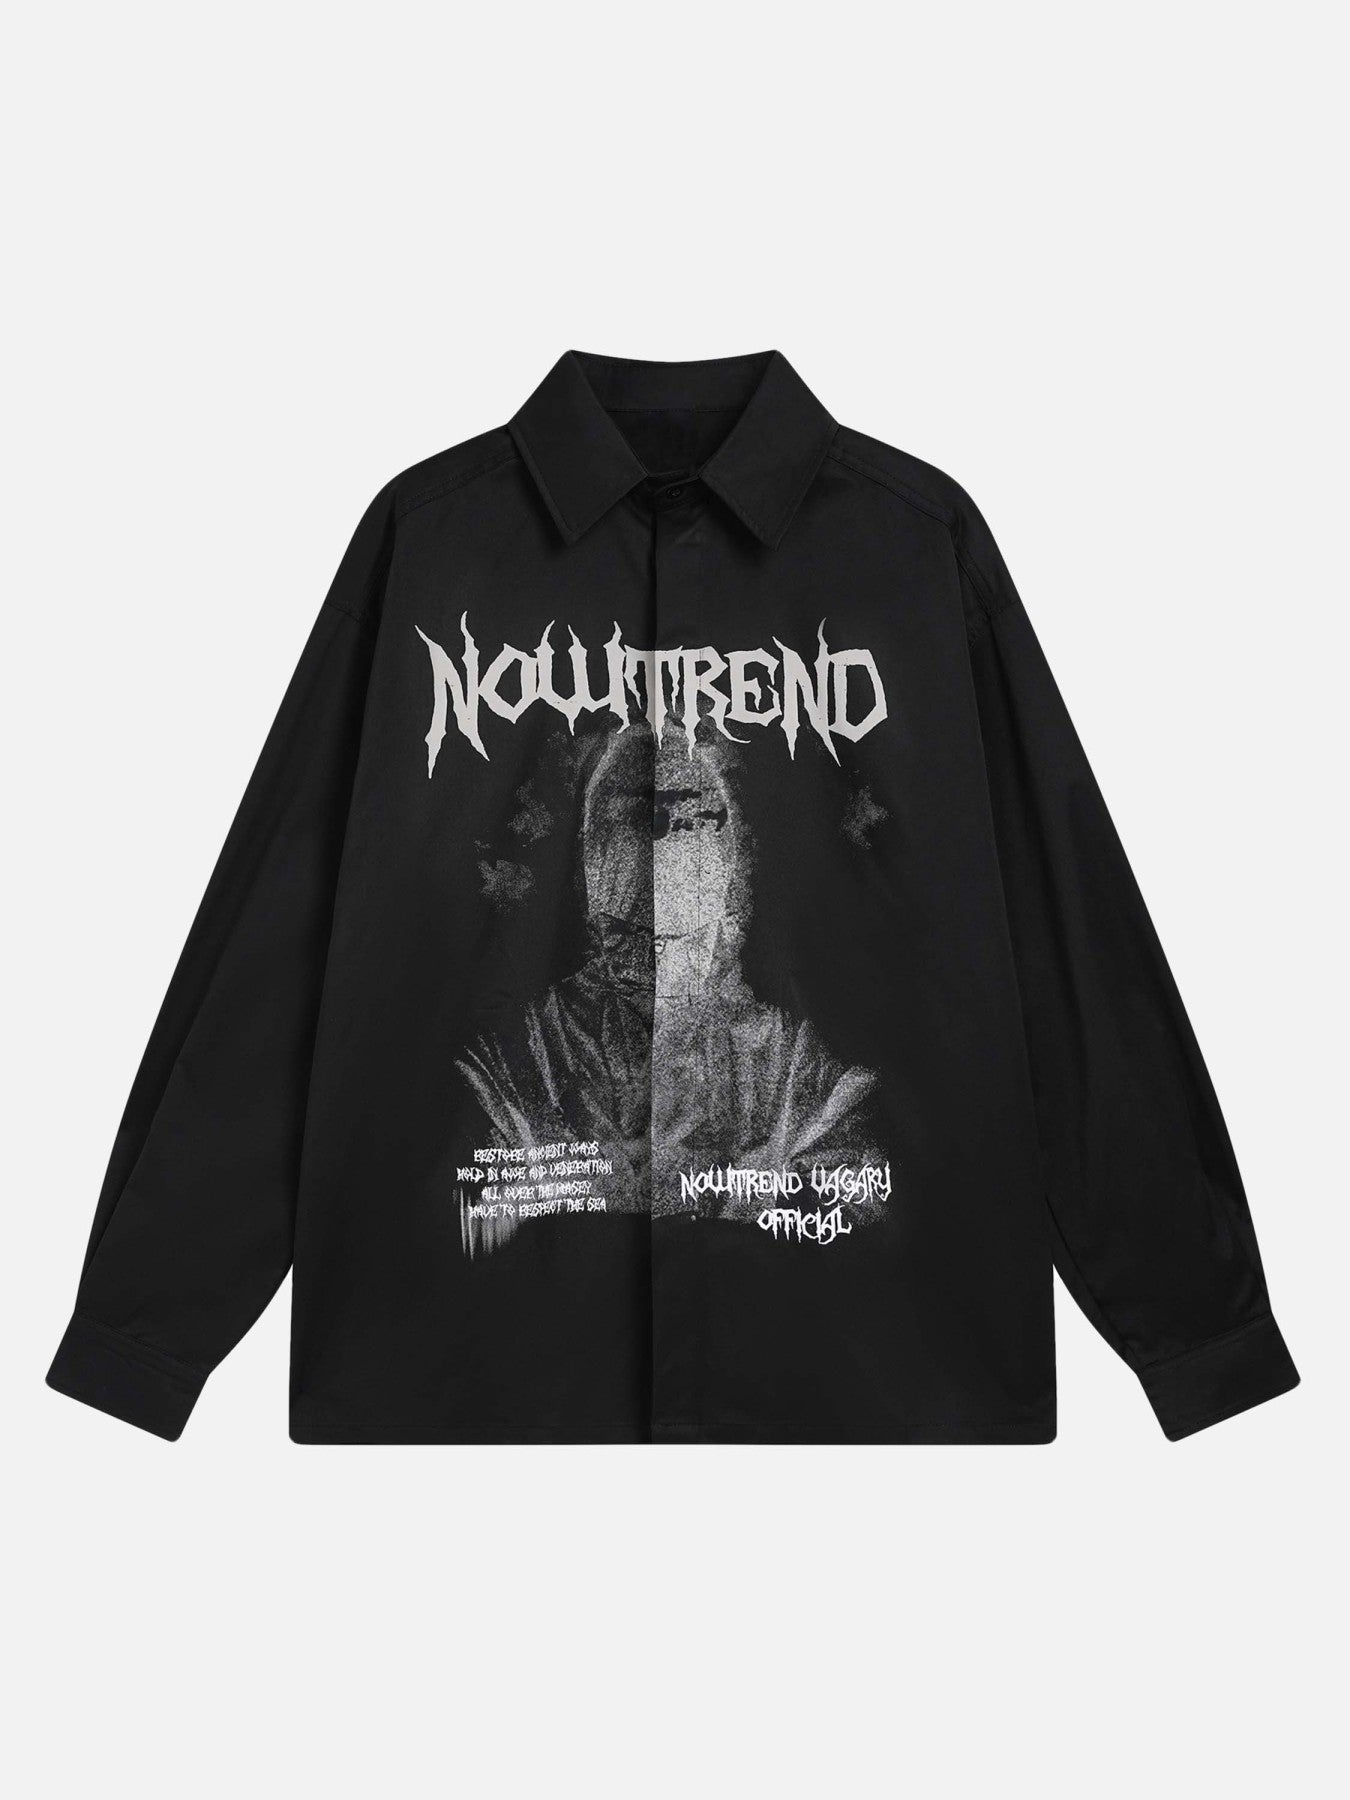 Thesupermade Silhouette Print Long Sleeve Shirt